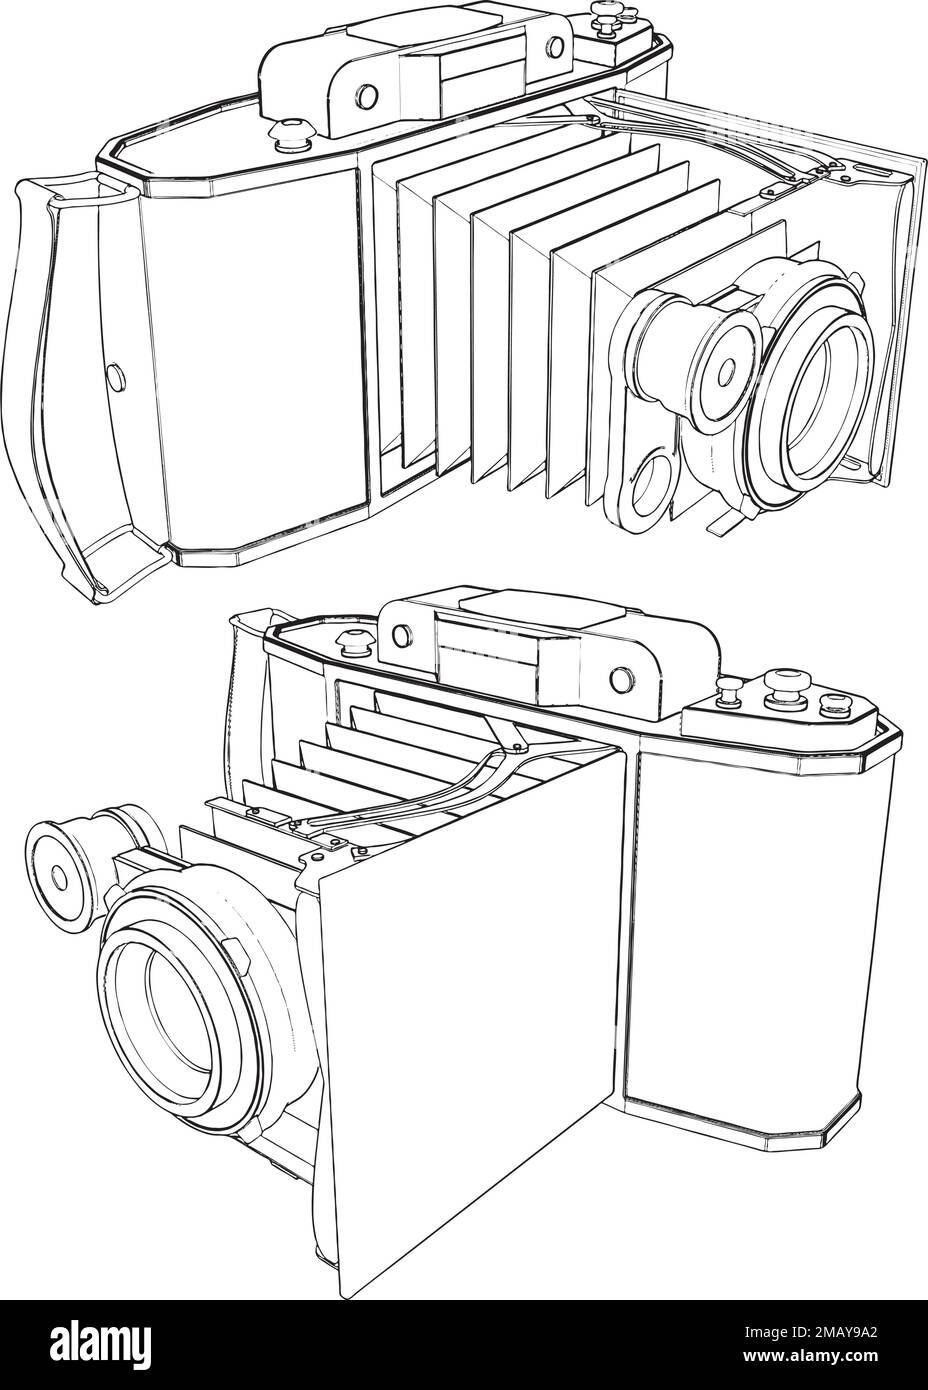 Old Photographic Camera Vector Stock Vector